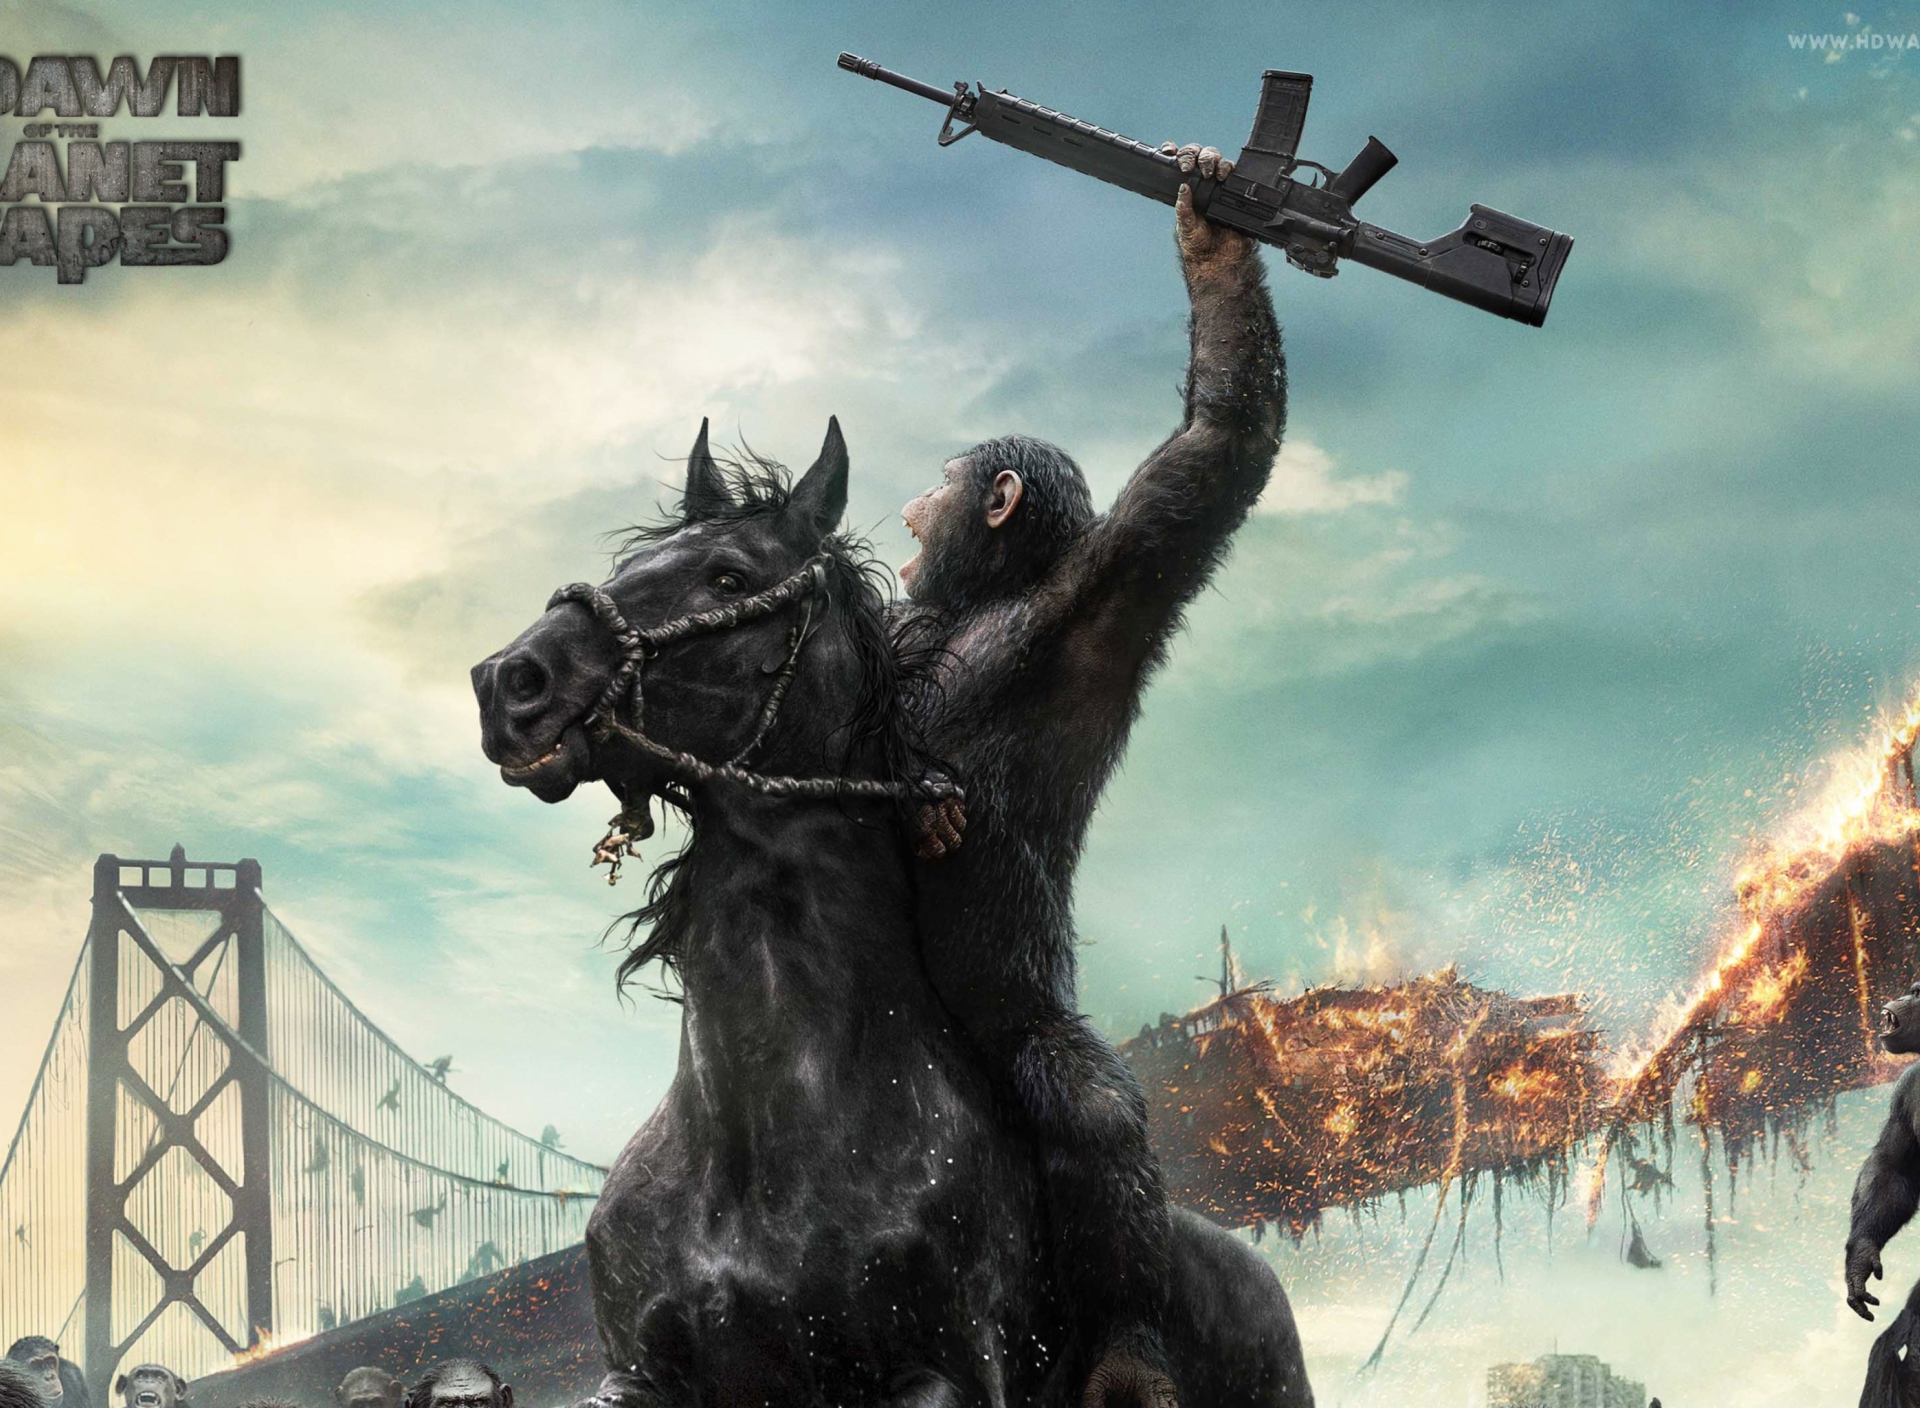 Dawn Of The Planet Of The Apes Movie wallpaper 1920x1408